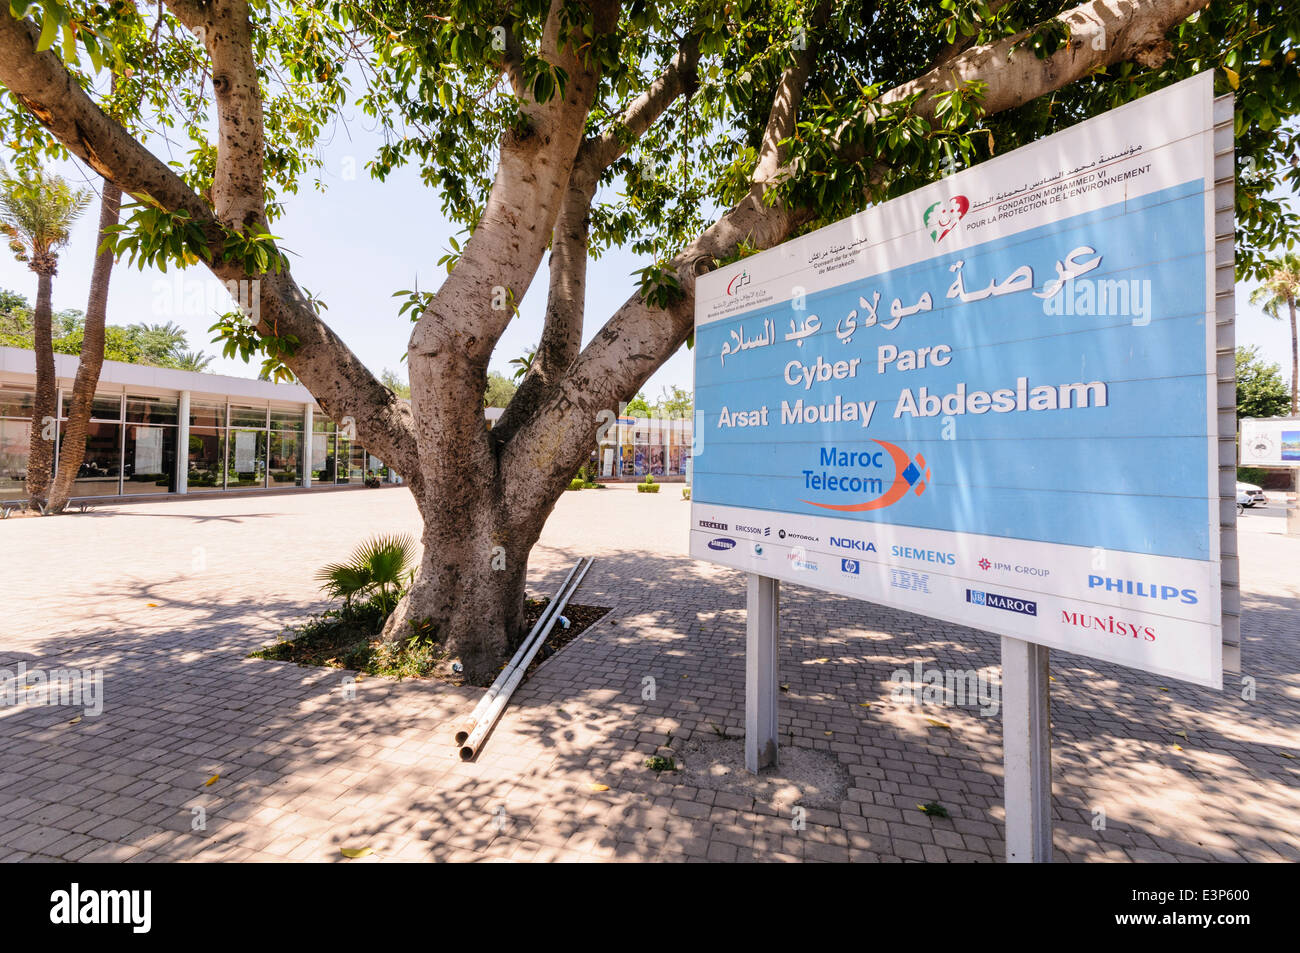 Sign at the Maroc Telecom Cyber Parc in Marrakech, Morocco Stock Photo